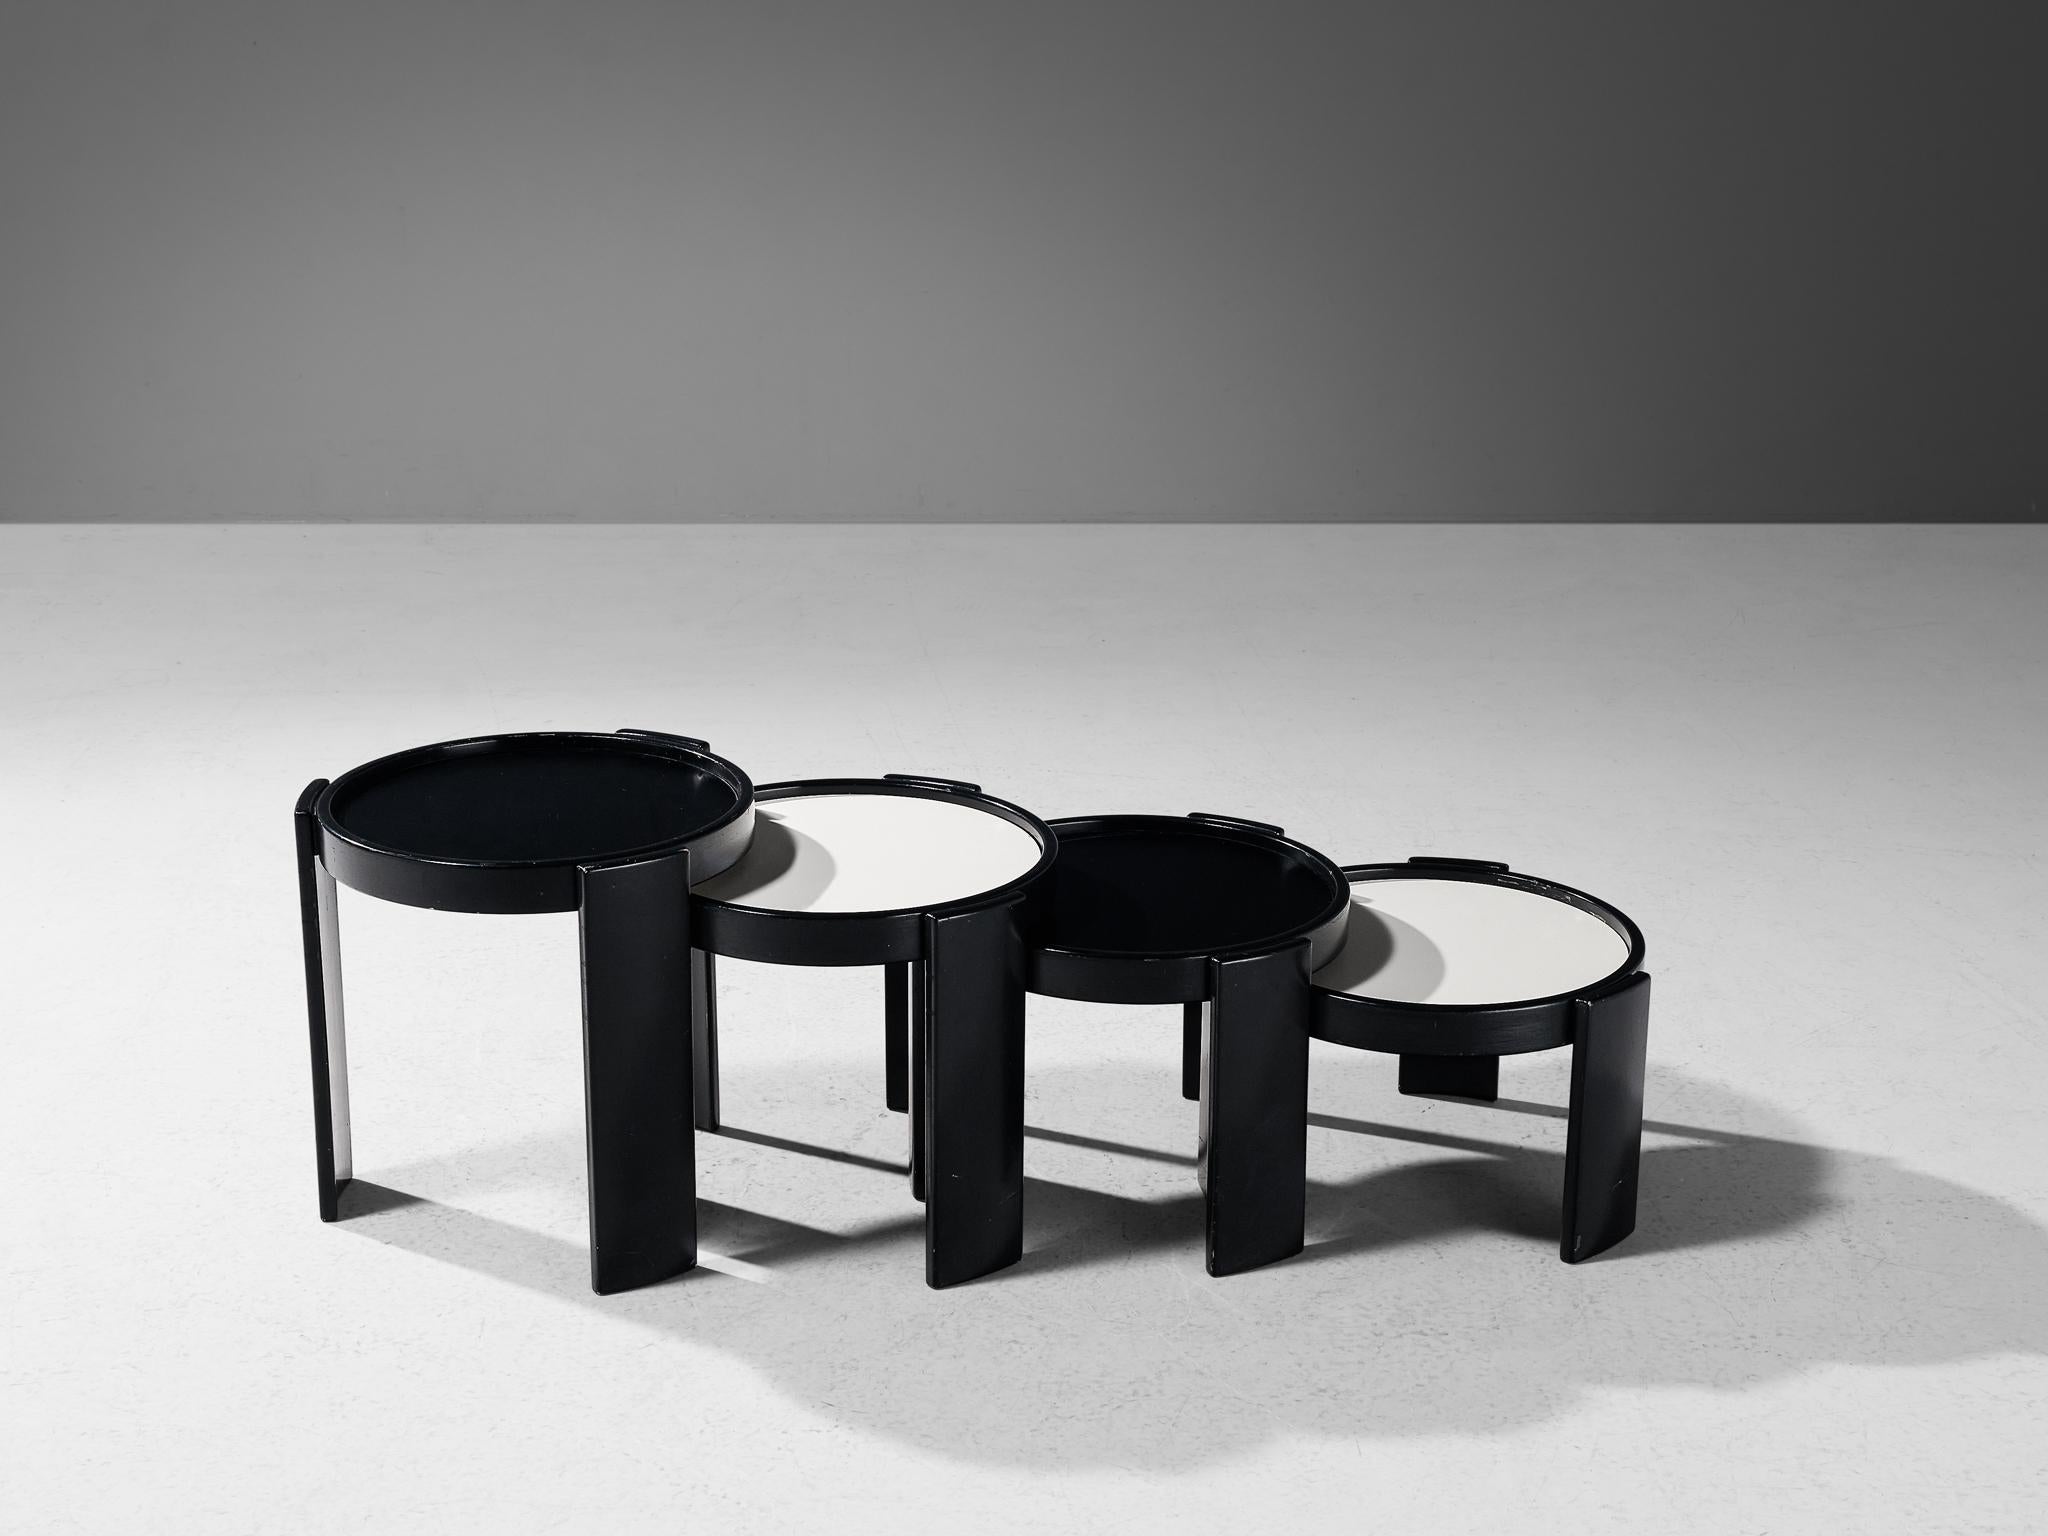 Gianfranco Frattini for Cassina, set of nesting tables, white and black lacquered wood, Italy, 1960s.

These nesting tables are designed by Gianfranco Frattini for Cassina. Half of the tables are white, while the other half is black lacquered wood,